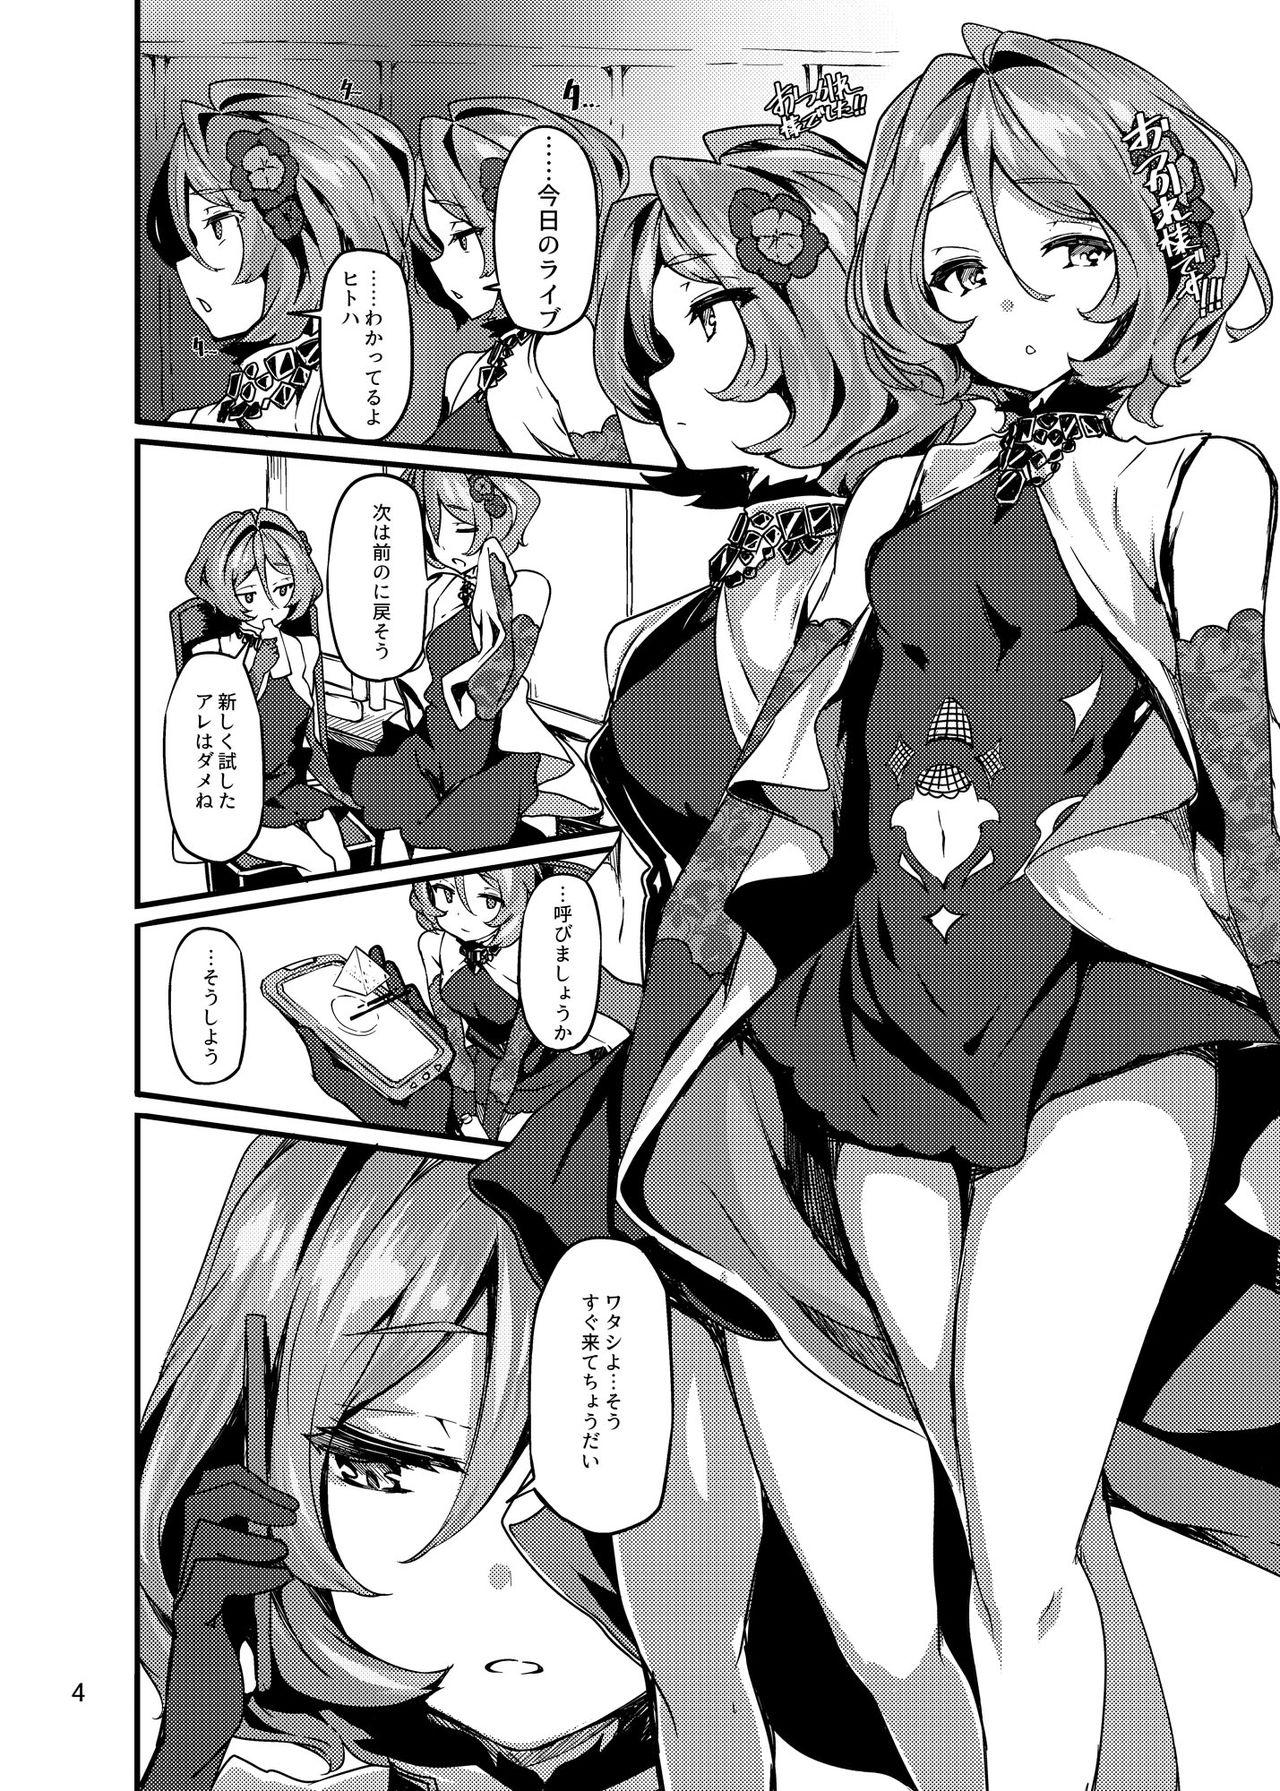 Cheating Twin x Sense - Tokyo 7th sisters Perfect Body - Page 3